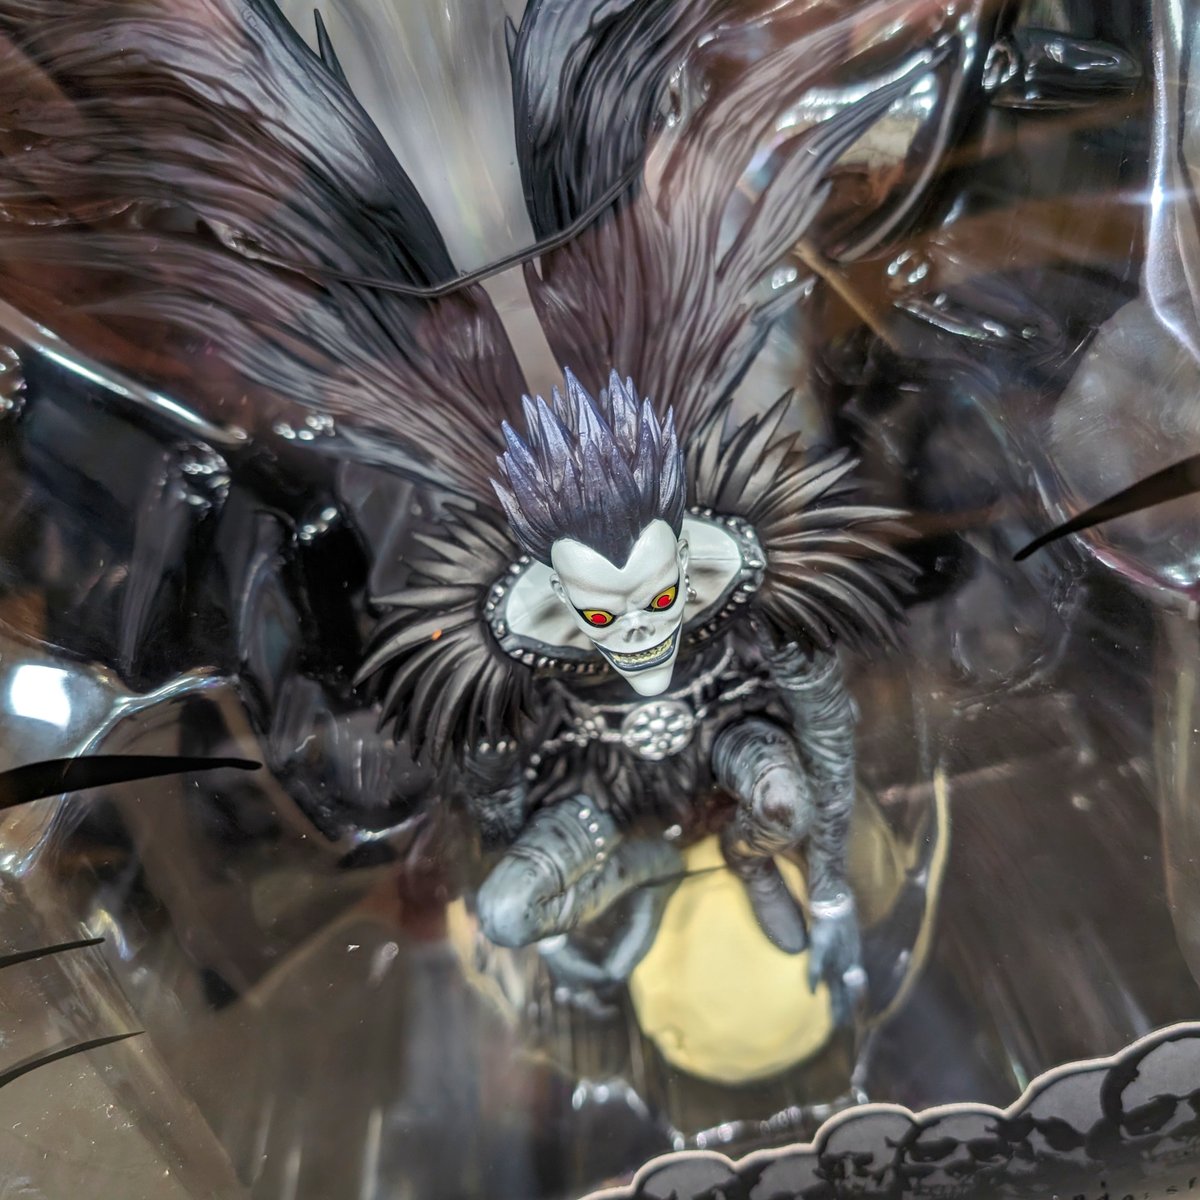 🌟🔥 Exciting Arrival Alert at Haiku Pop! 📚🍎 Fans of Deathnote, get ready for something spectacular! We've just received a brand new shipment featuring the stunning Abysse Ryuk Figure.  #Deathnote #RyukFigure #AnimeCollectibles #HaikuPopGaming 🎲💀🍏🌟